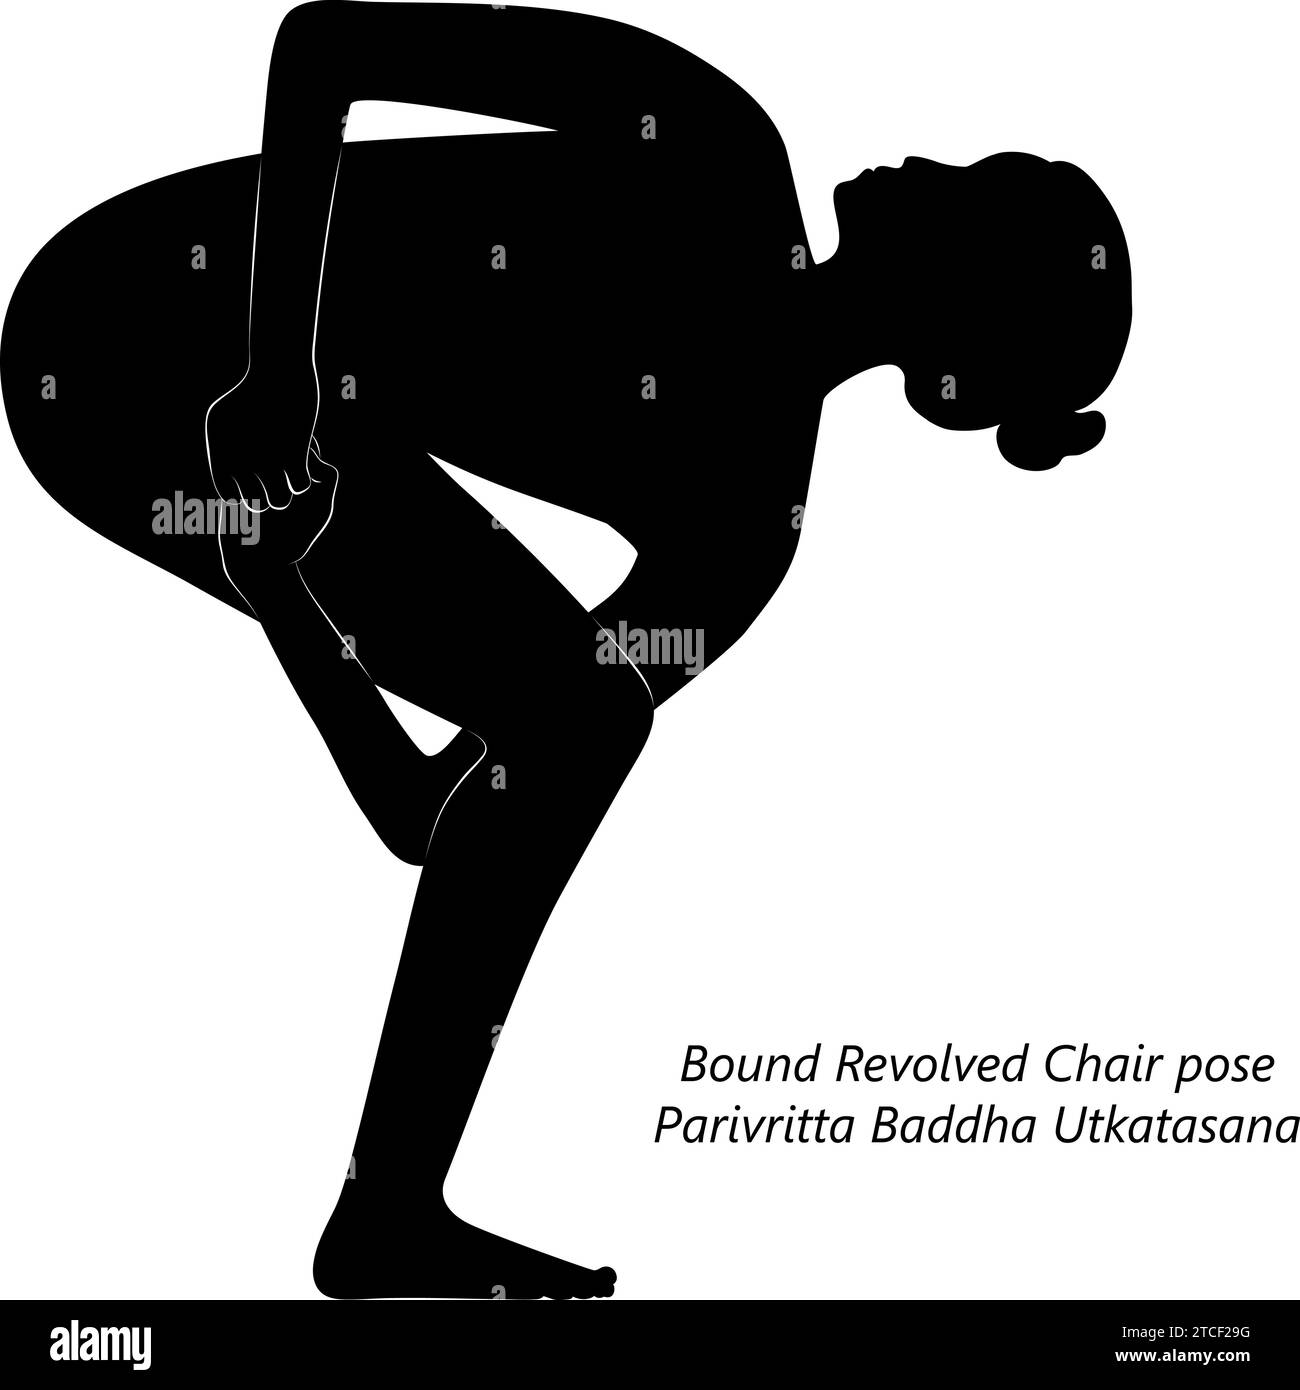 Essential Yoga Poses - Revolved Side Angle and Revolved Chair | Alo Moves